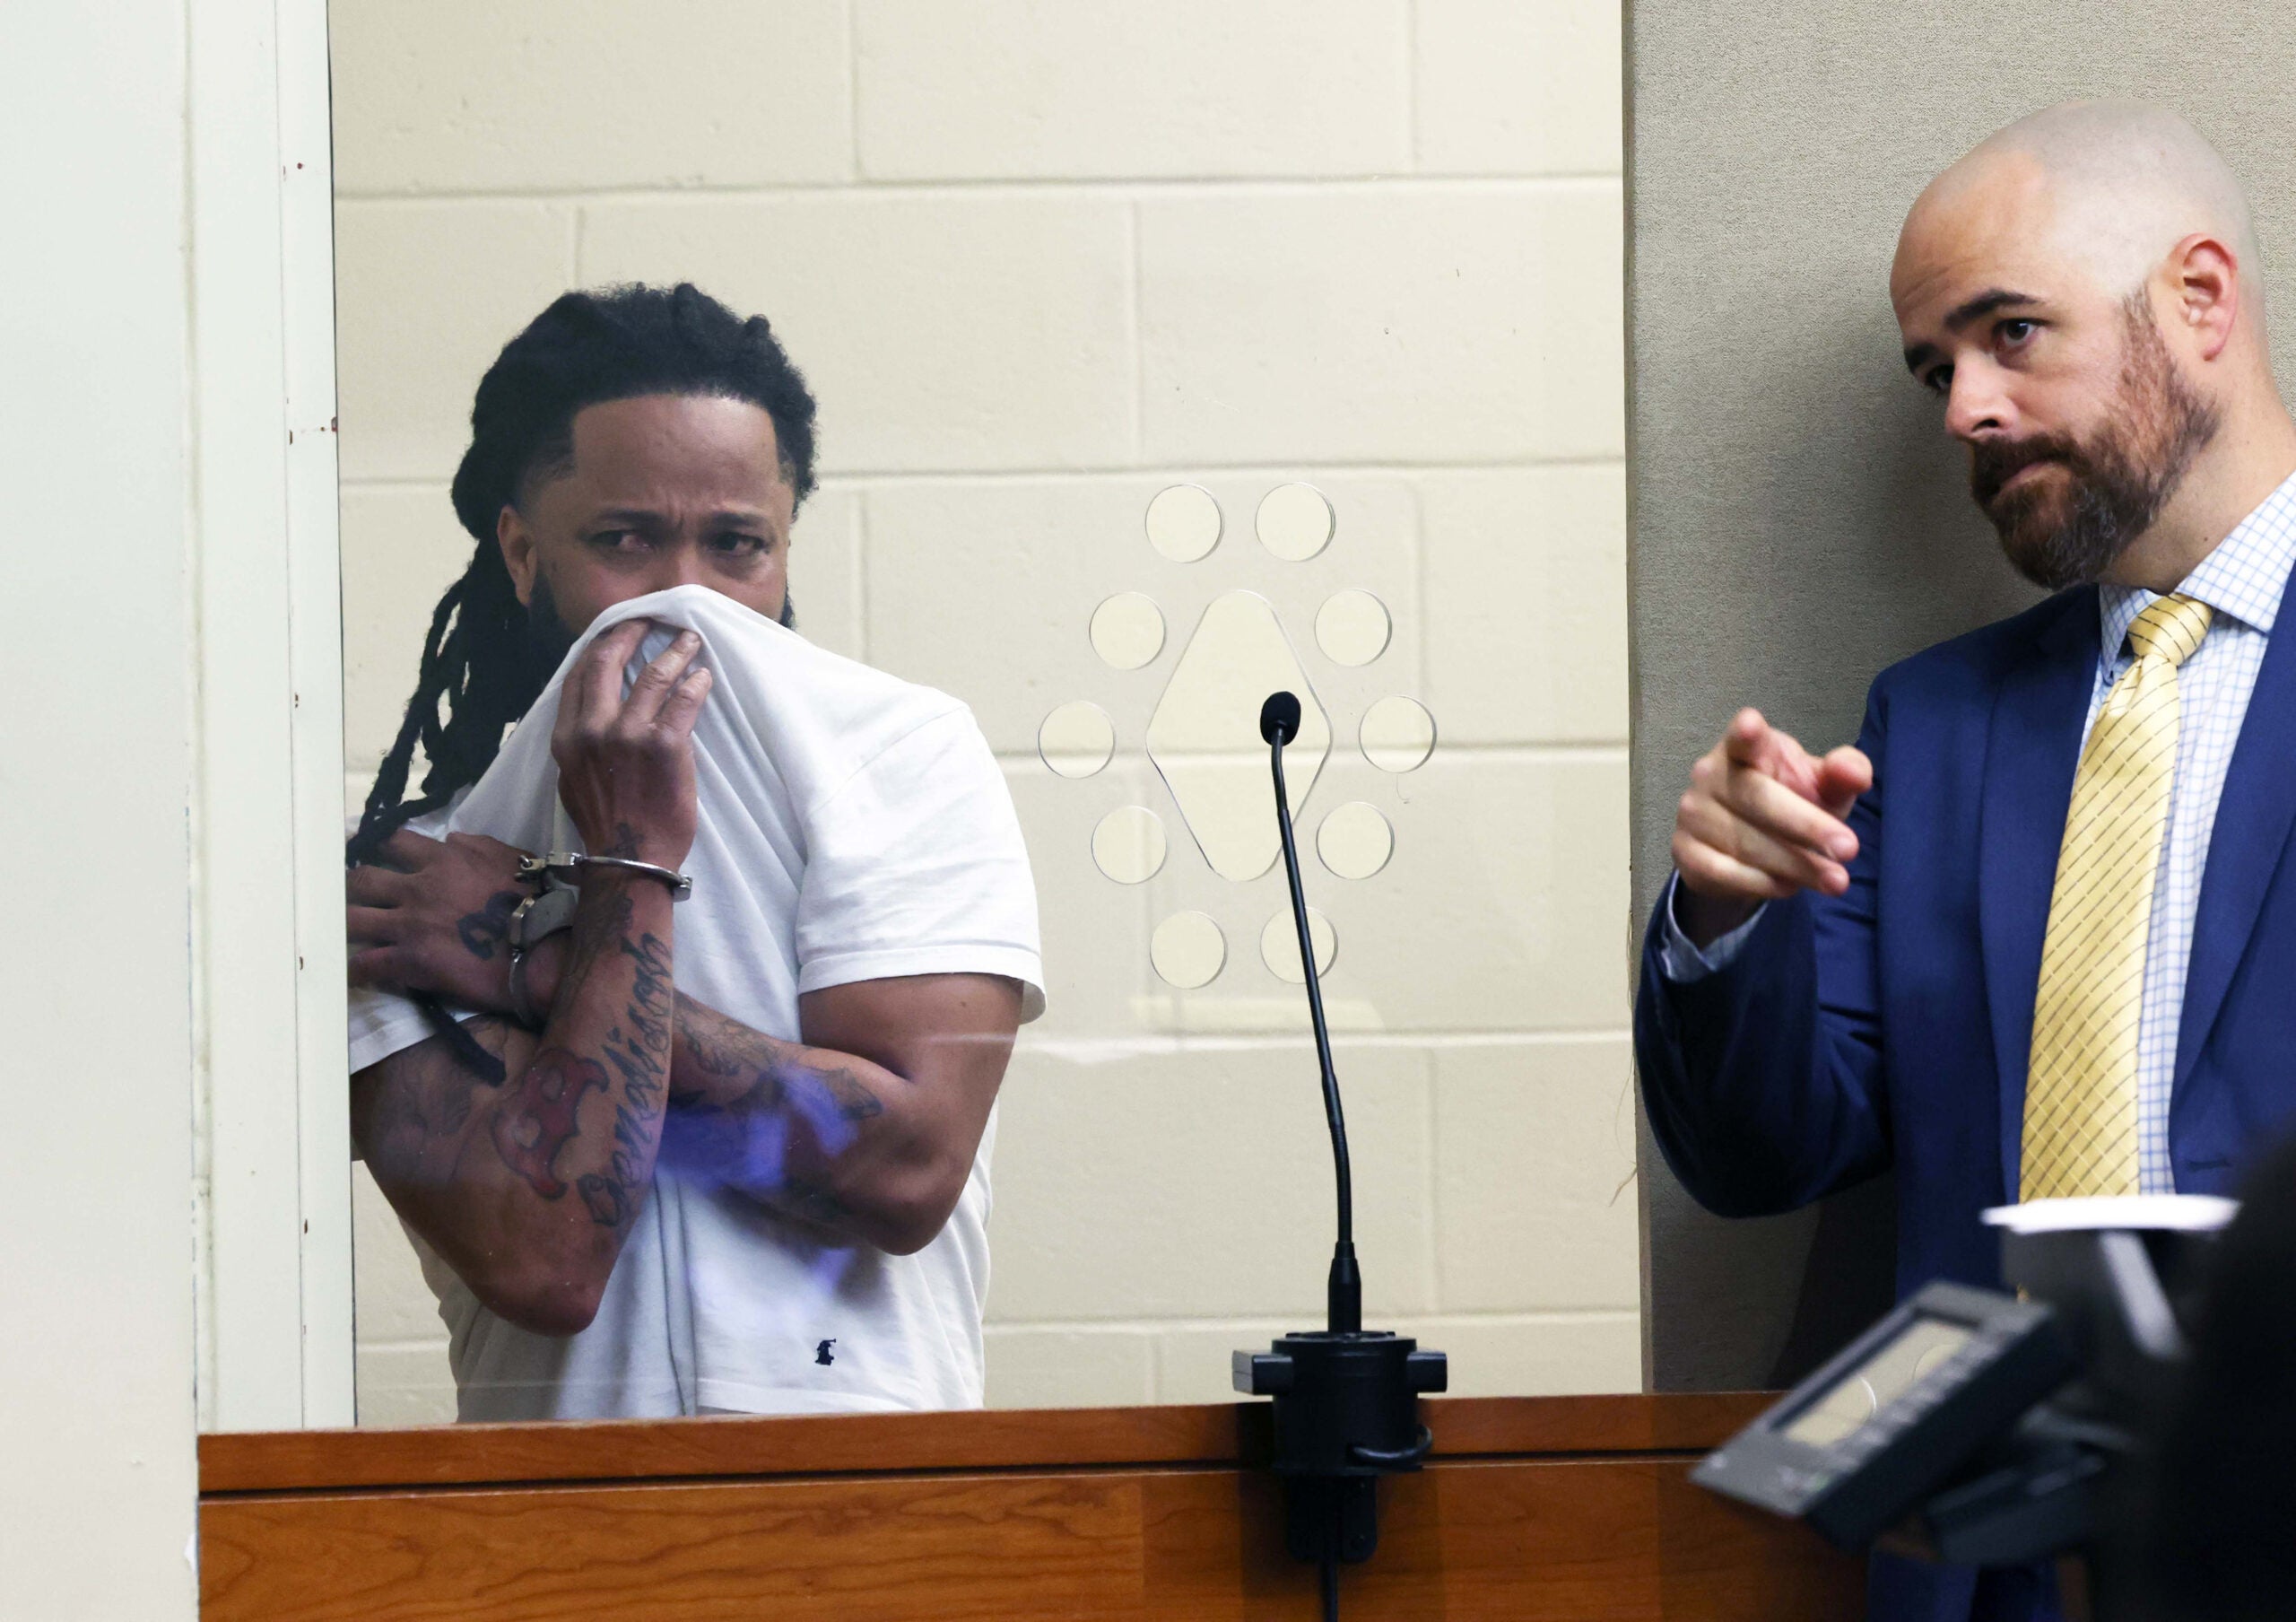 Justelino Resende, 38, left, was arraigned in Brockton District Court on Tuesday. His attorney, Daniel Pond, is pictured at right.